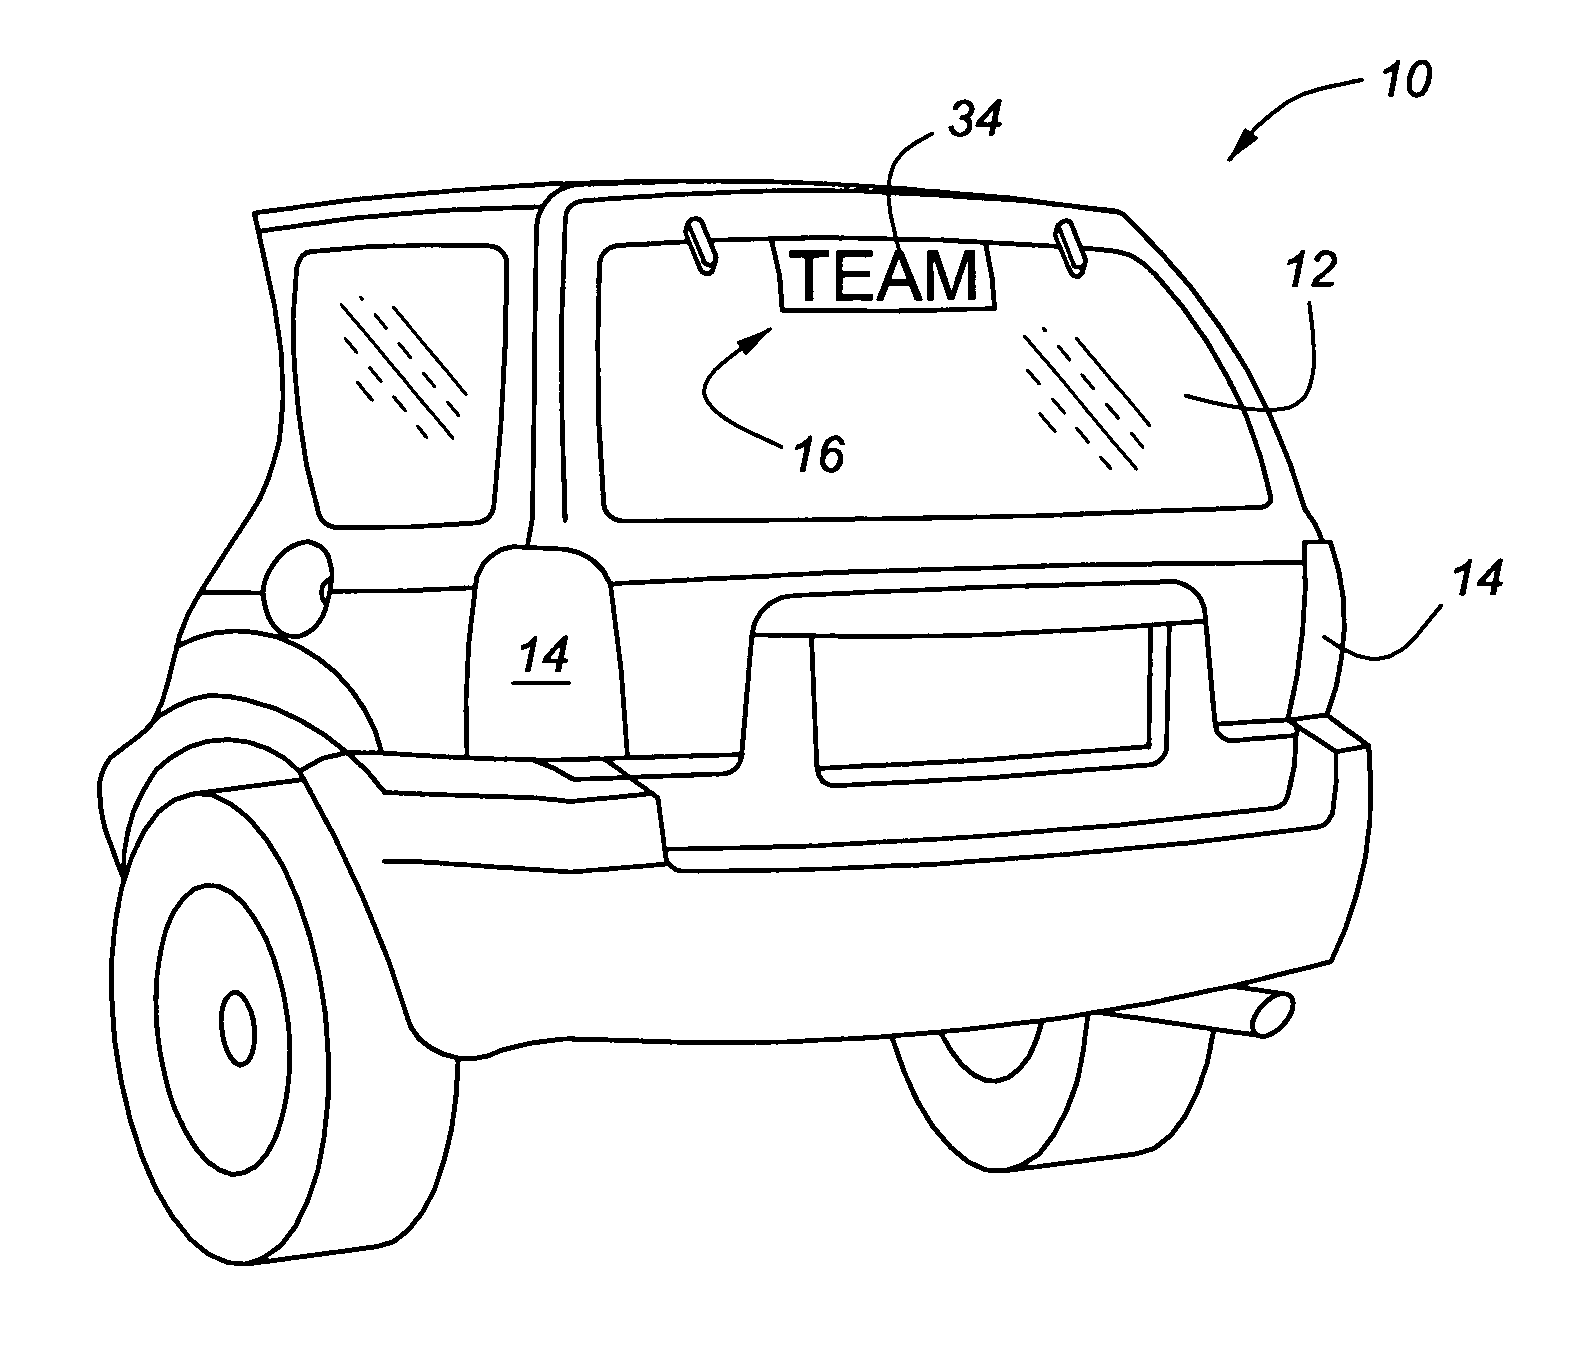 Vehicular lighting fixture with non-directional dispersion of light